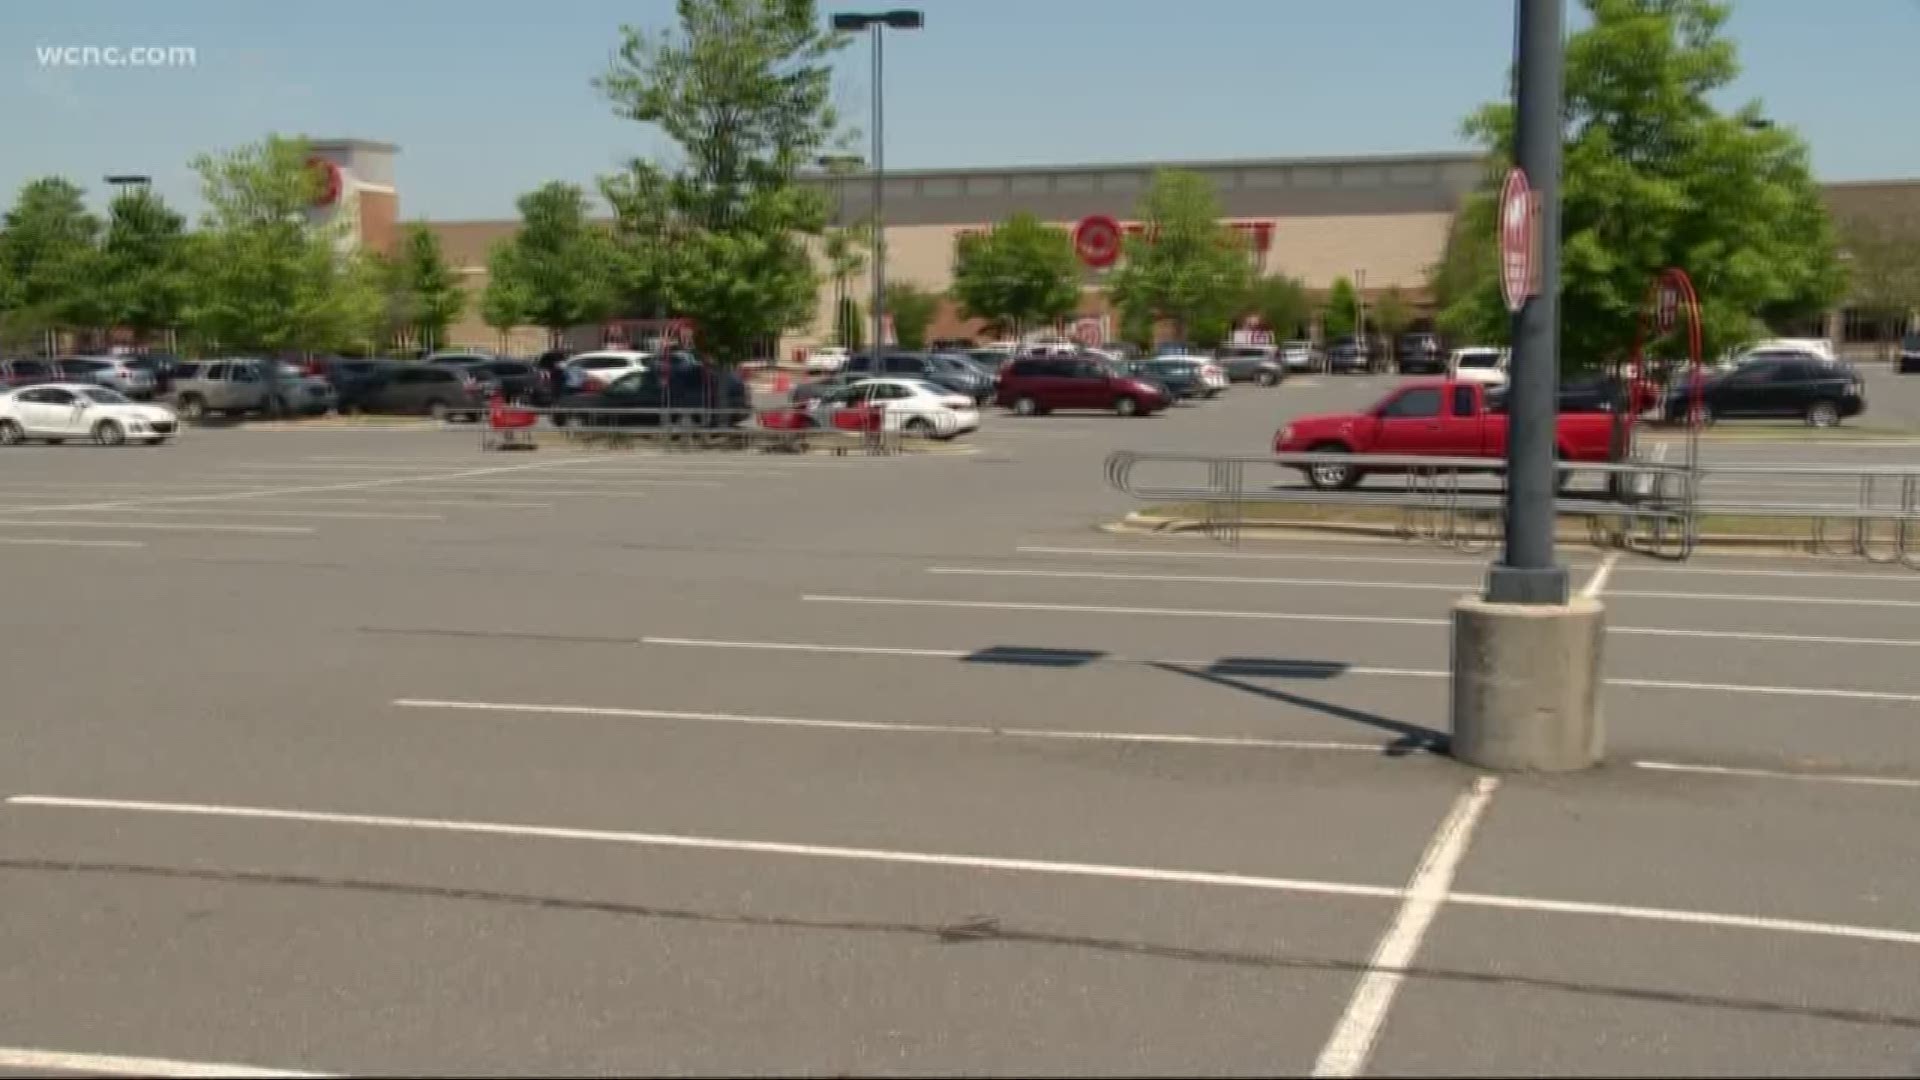 Shoplifters have stolen hundreds of dollars in household items. In another case, police say a man robbed a Target by threatening an employee with a weapon.